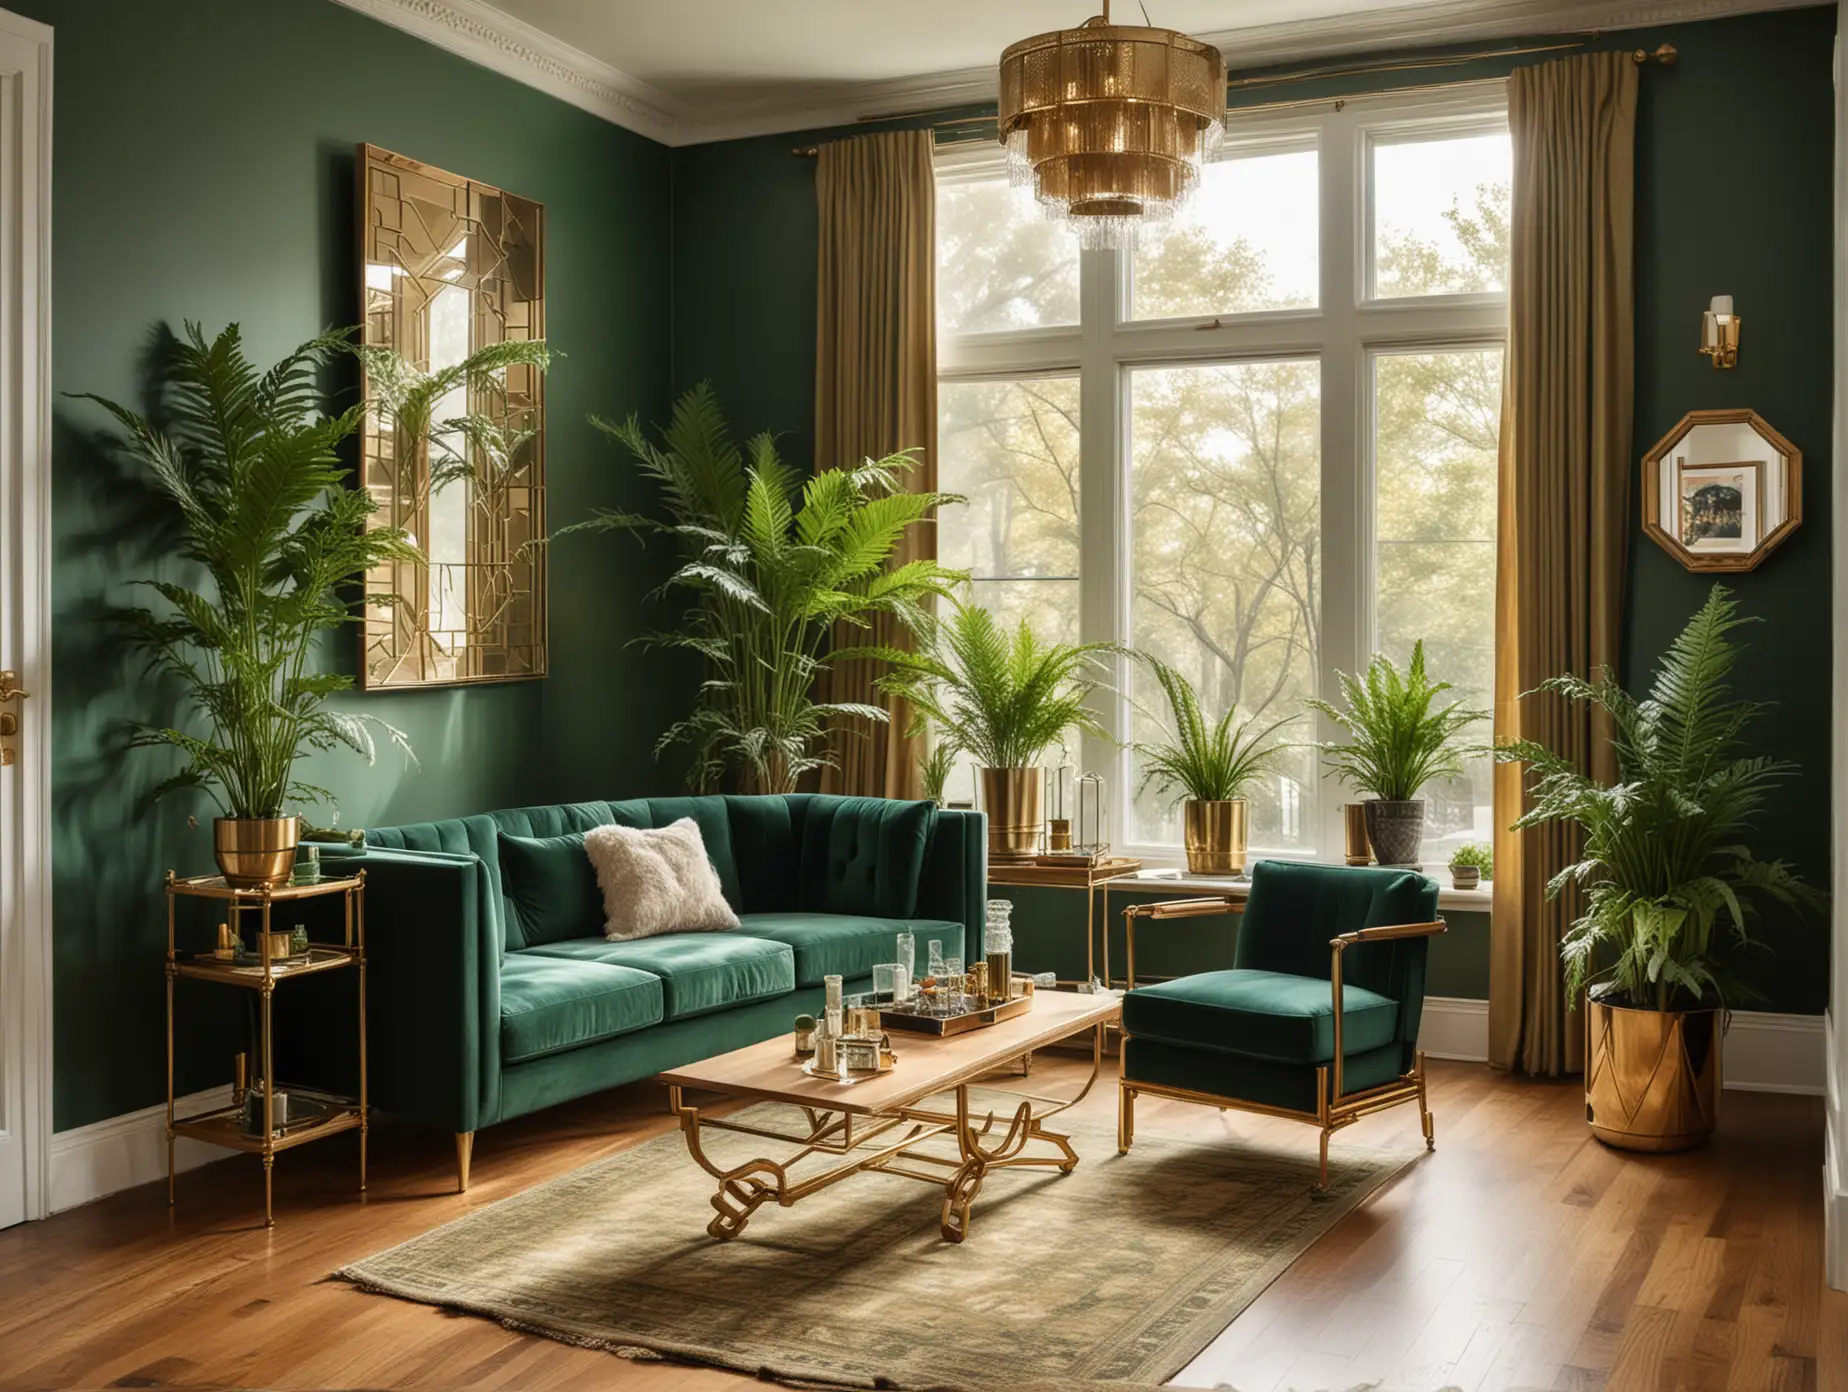 A wide shot of An art deco-inspired living room with emerald green walls, gold accents in the furniture and lighting, polished oak floors, fern plants in metallic planters, and a large window showing sunny weather outside, with shadows creating geometric patterns on the floor. The wide shot from the hallway includes a vintage bar cart, a stylish floor lamp, and additional seating with a retro armchair and side table